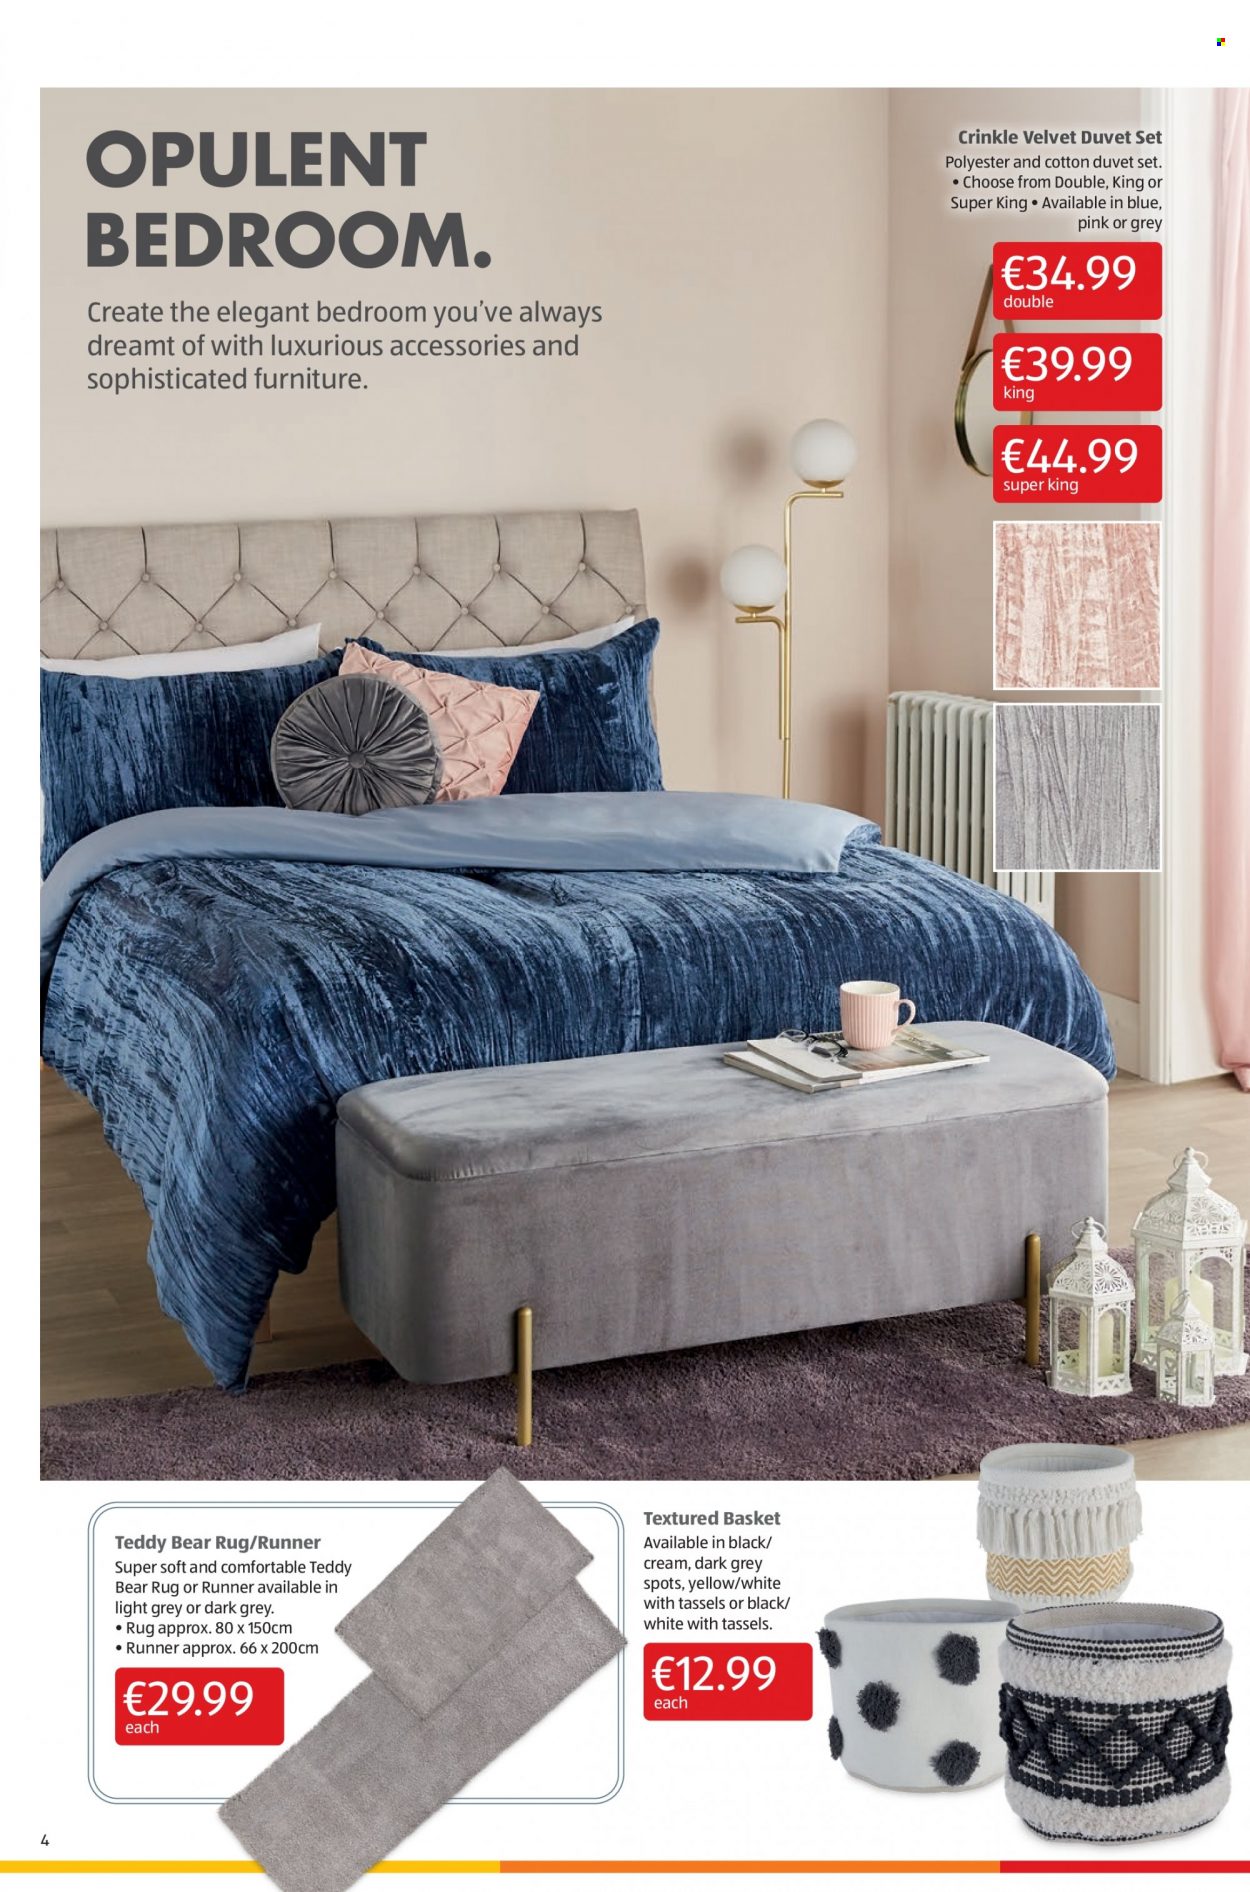 thumbnail - Aldi offer  - 30.09.2021 - 06.10.2021 - Sales products - basket, duvet, teddy. Page 4.